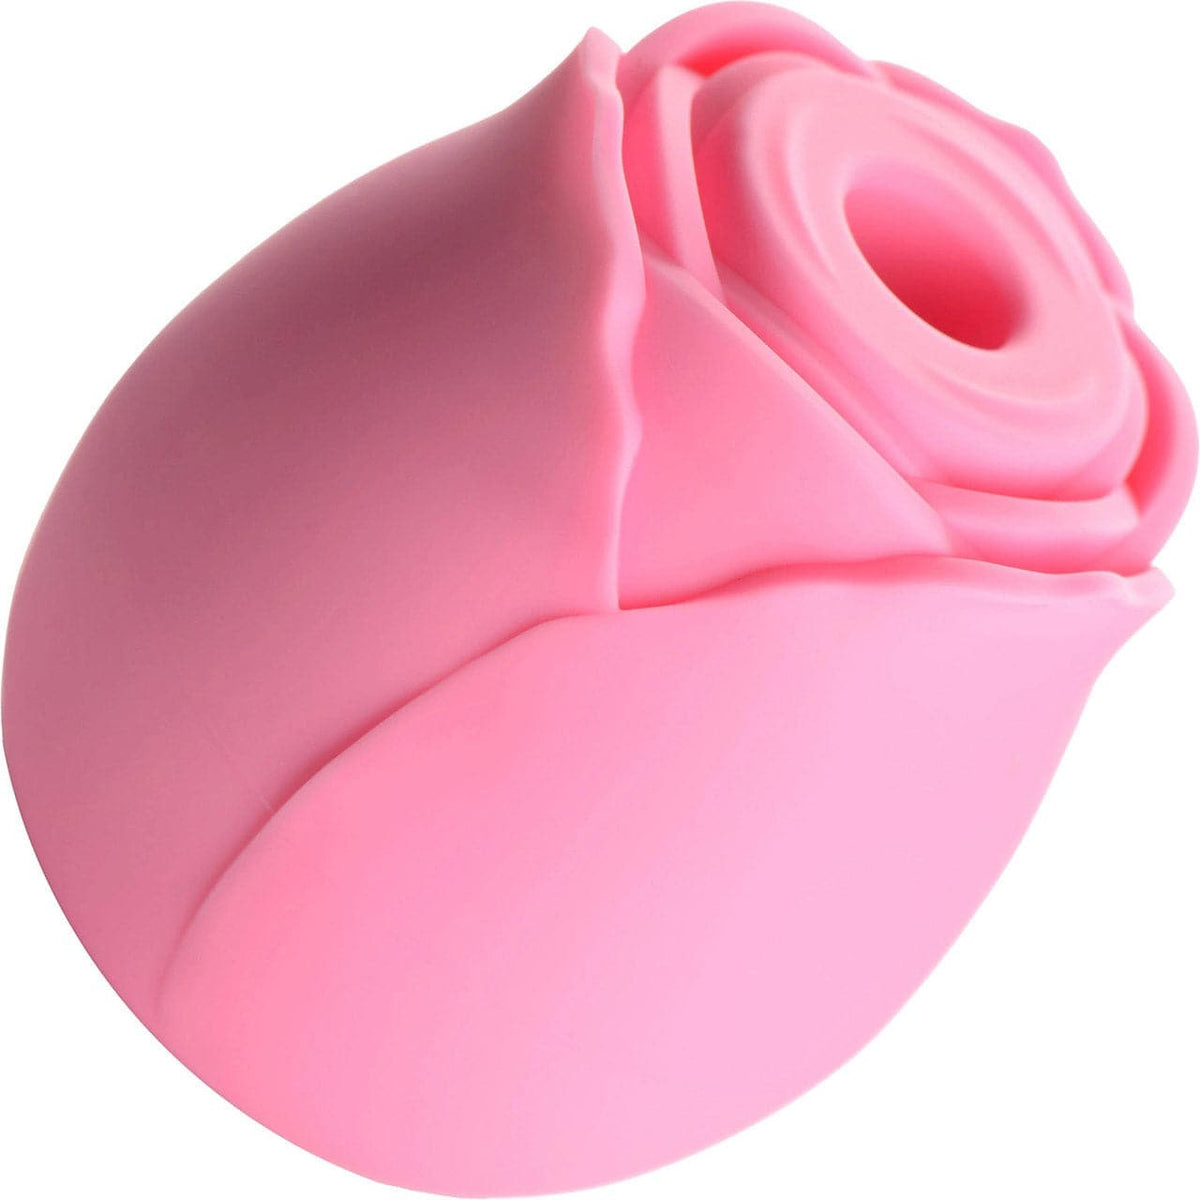 inmi bloomgasm wild rose 10x suction pink